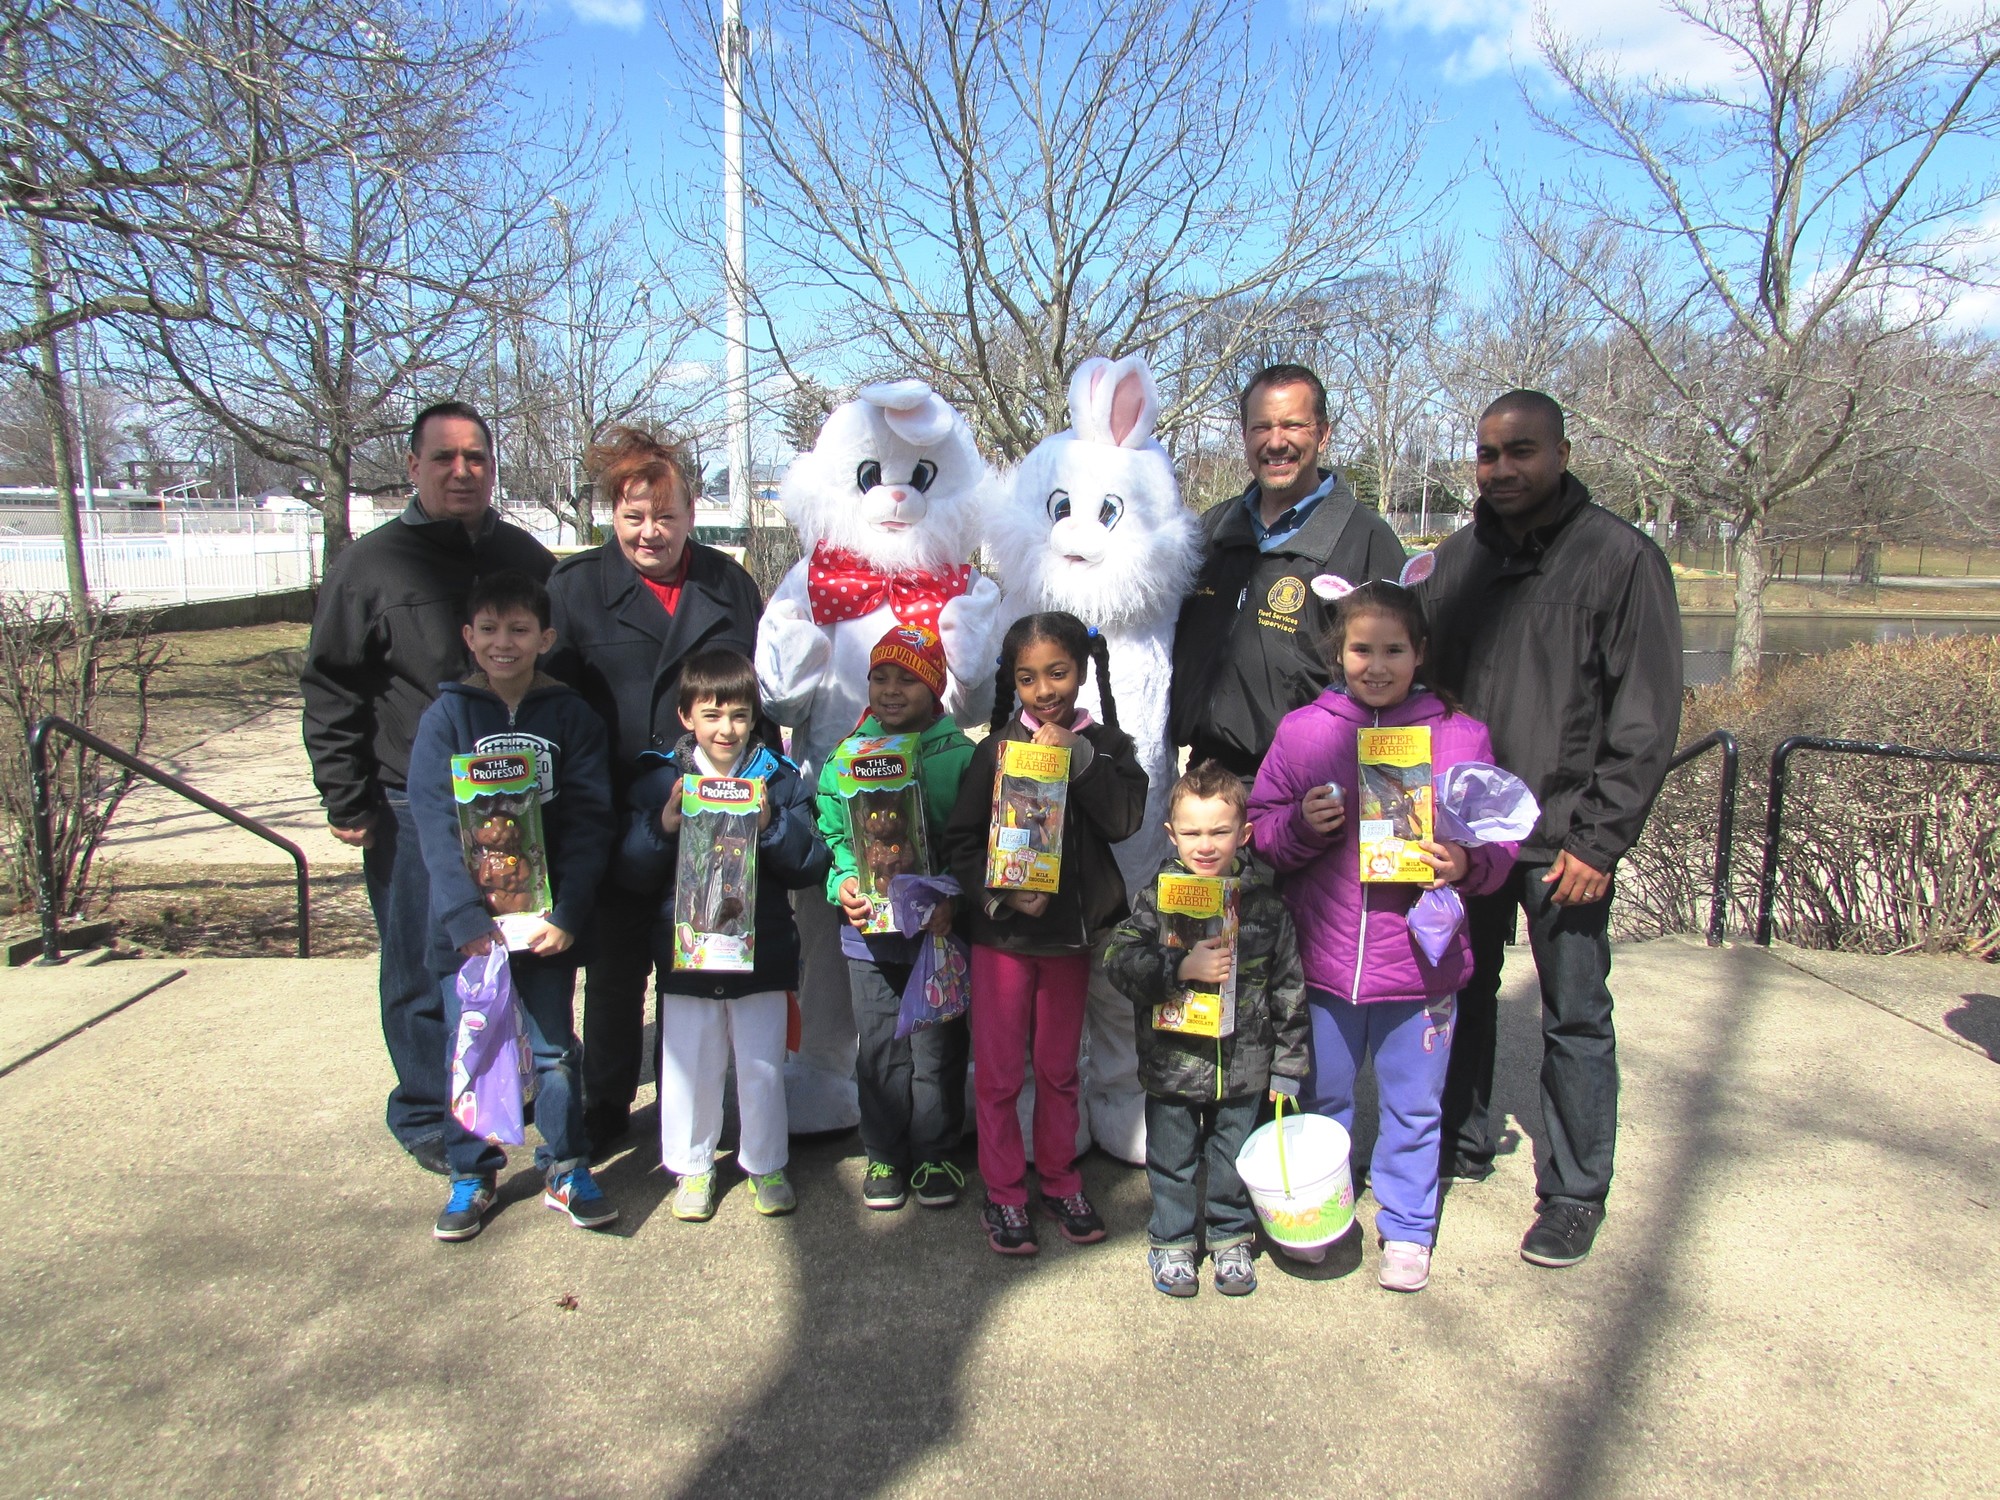 In the back, from left, are Trustee John Tufarelli, Elks member Anitra Butler, Mr. and Mrs. Easter Bunny,  Mayor Ed Fare and Trustee Dermond Thomas. In front are David Berrios, 9, Anthony Sacrone, 6, Hunter Rush, 5, Tamerra Osmani, 7,   Nicholas Abrams, 4, and Isabelle Pimentel, 8.